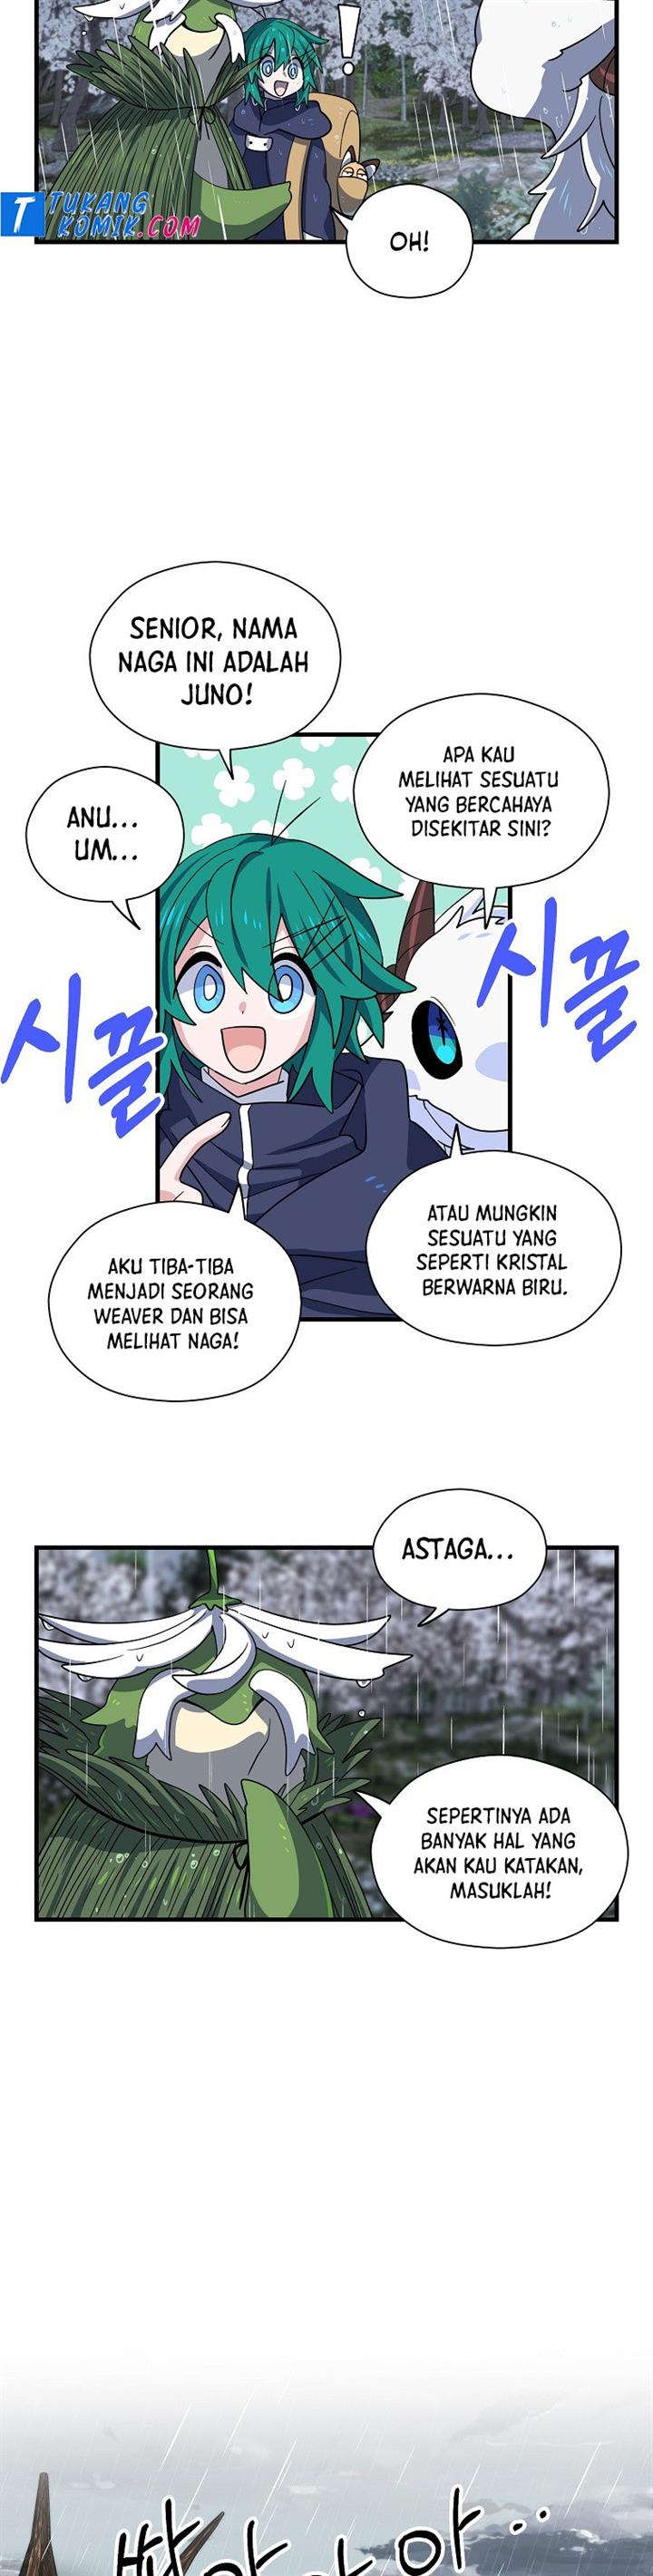 Asterisk The Dragon Walking on the Milky Way Chapter 6